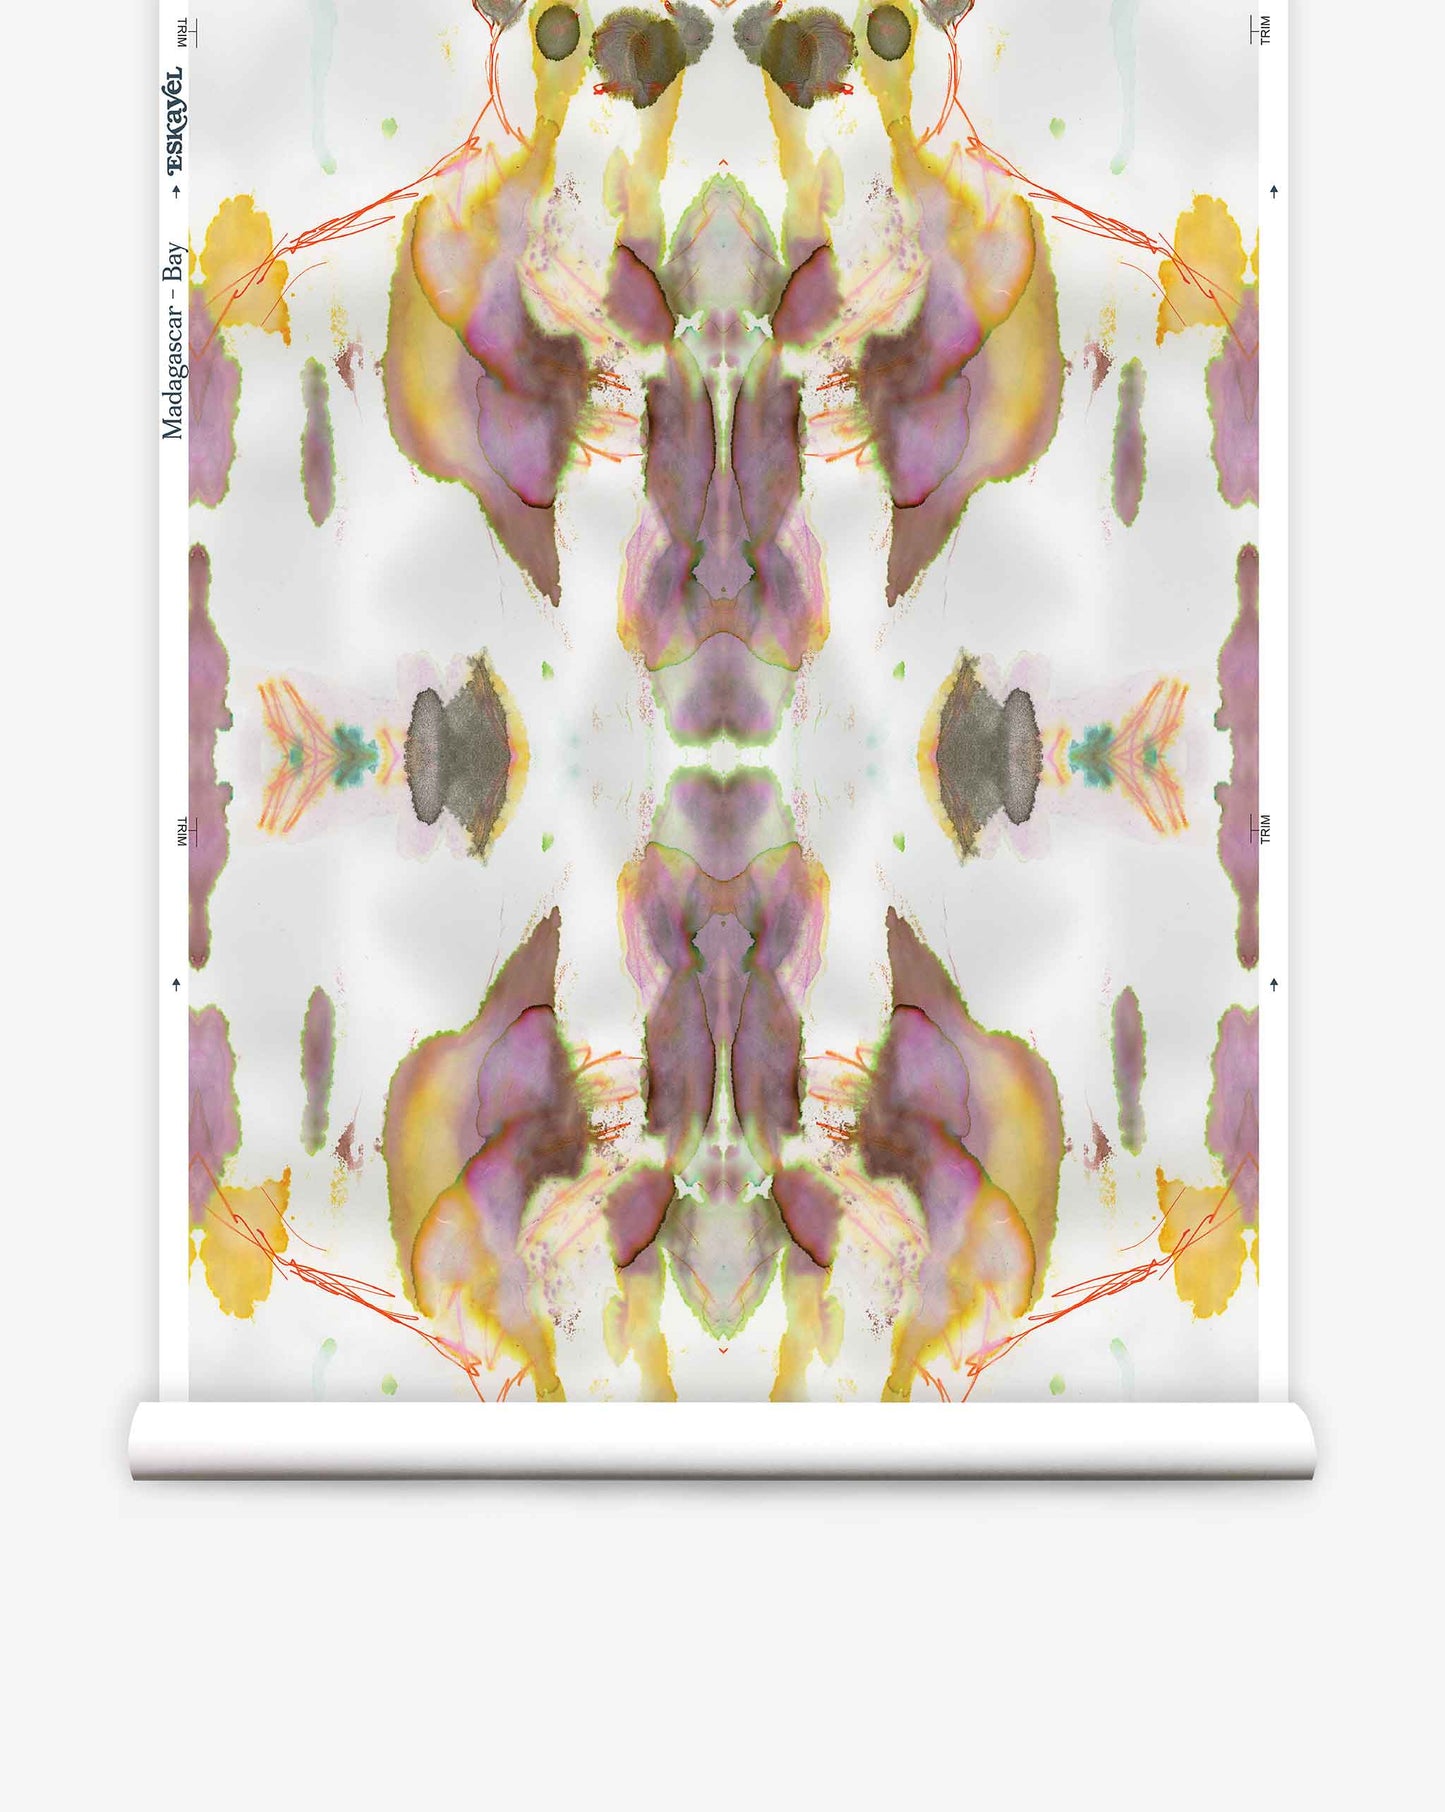 Abstract symmetrical watercolor pattern in pastel colors printed on a roll of luxury Madagascar Wallpaper||Bay, featuring a blend of yellow, green, purple, and orange hues.